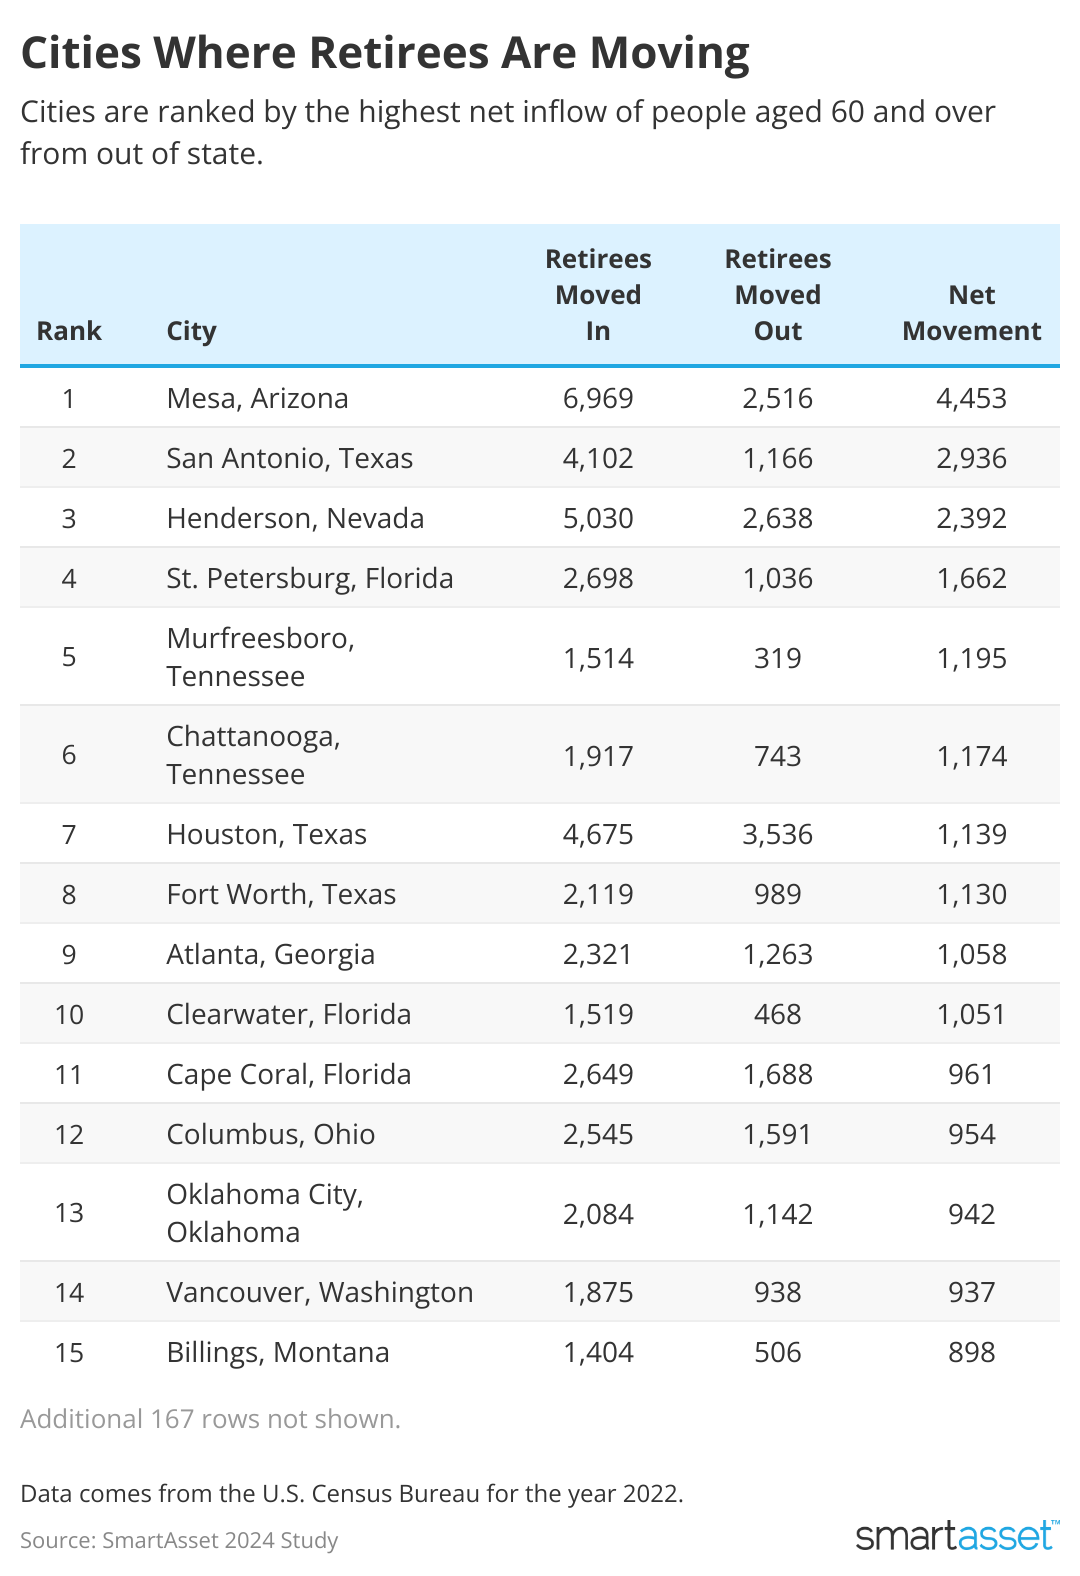 Table showing Top 20 cities where retirees are moving.